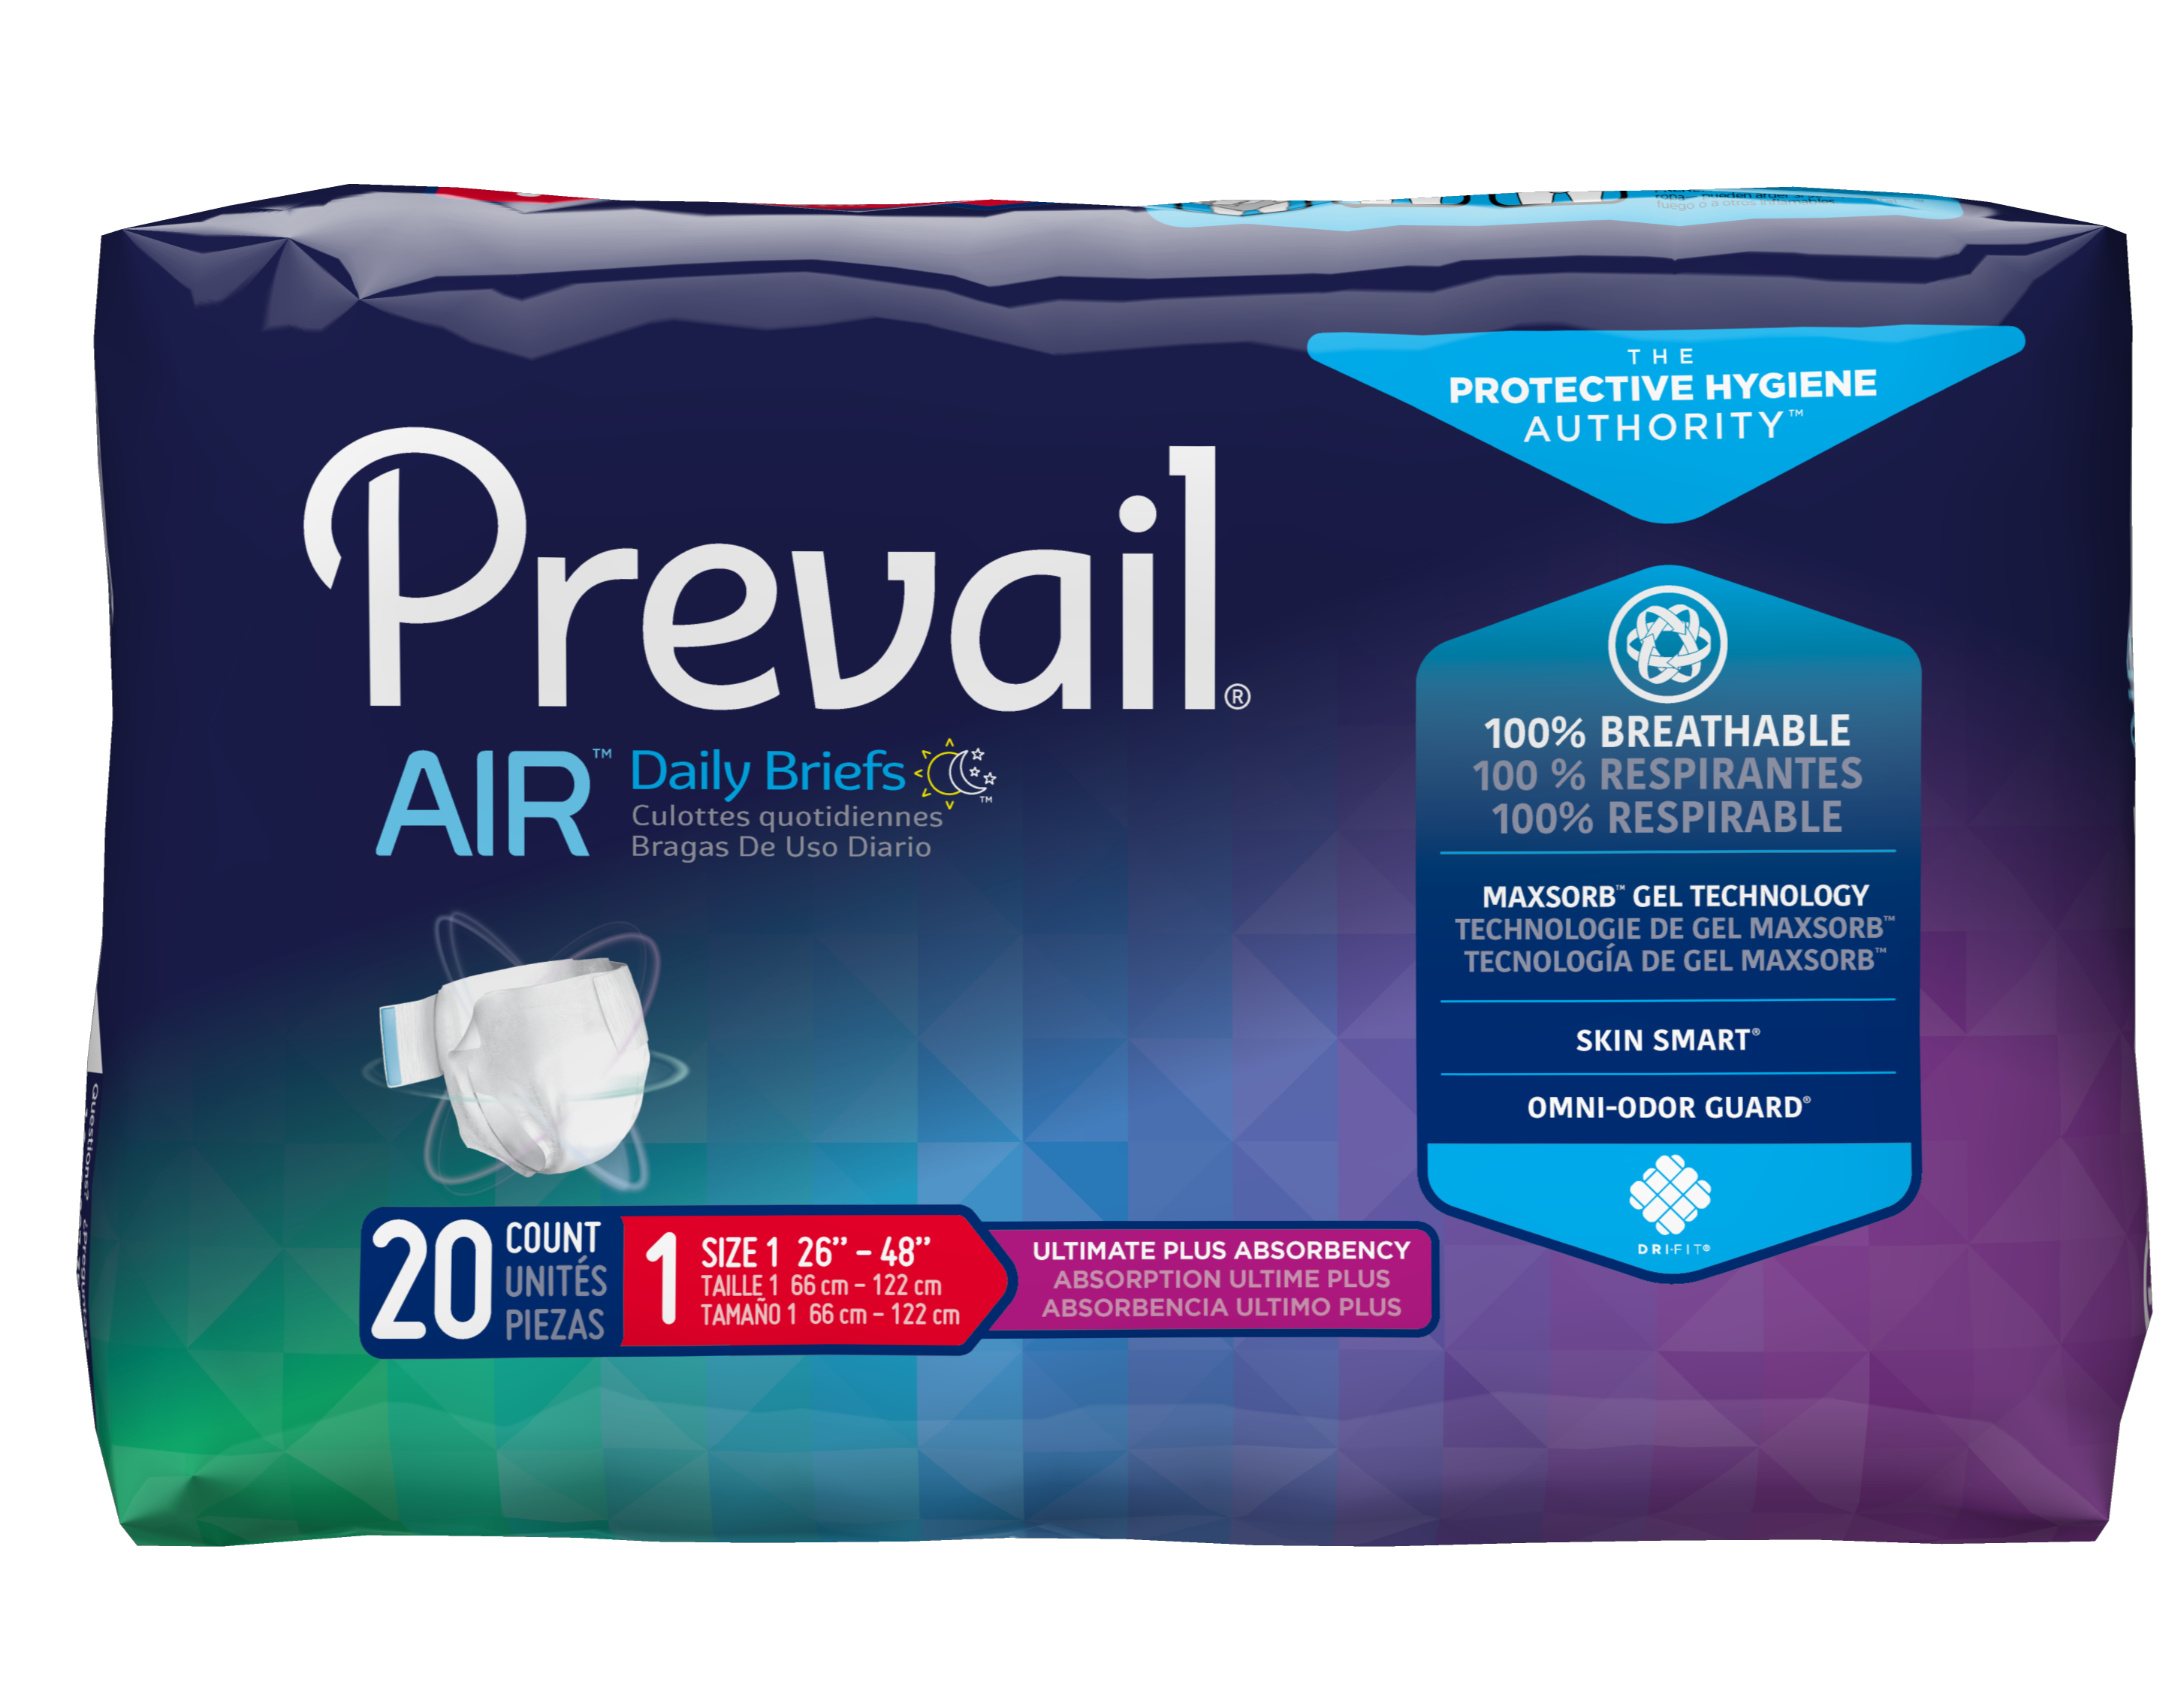 Prevail For Women Daily Disposable Underwear Female Large, Maximum